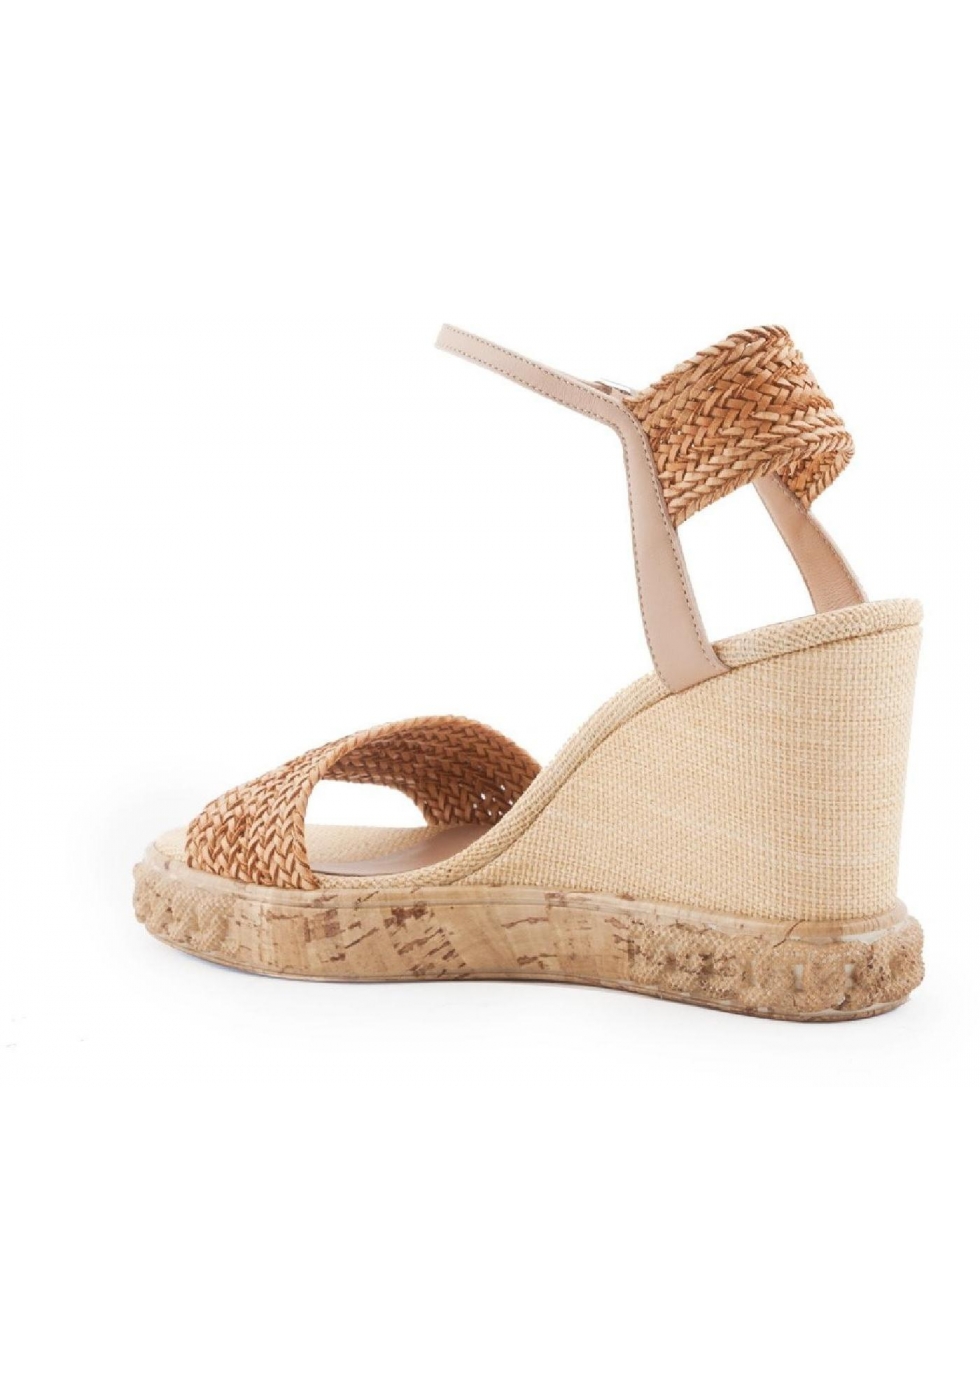 Casadei high heels wedges sandals in leather and straw - Italian Boutique